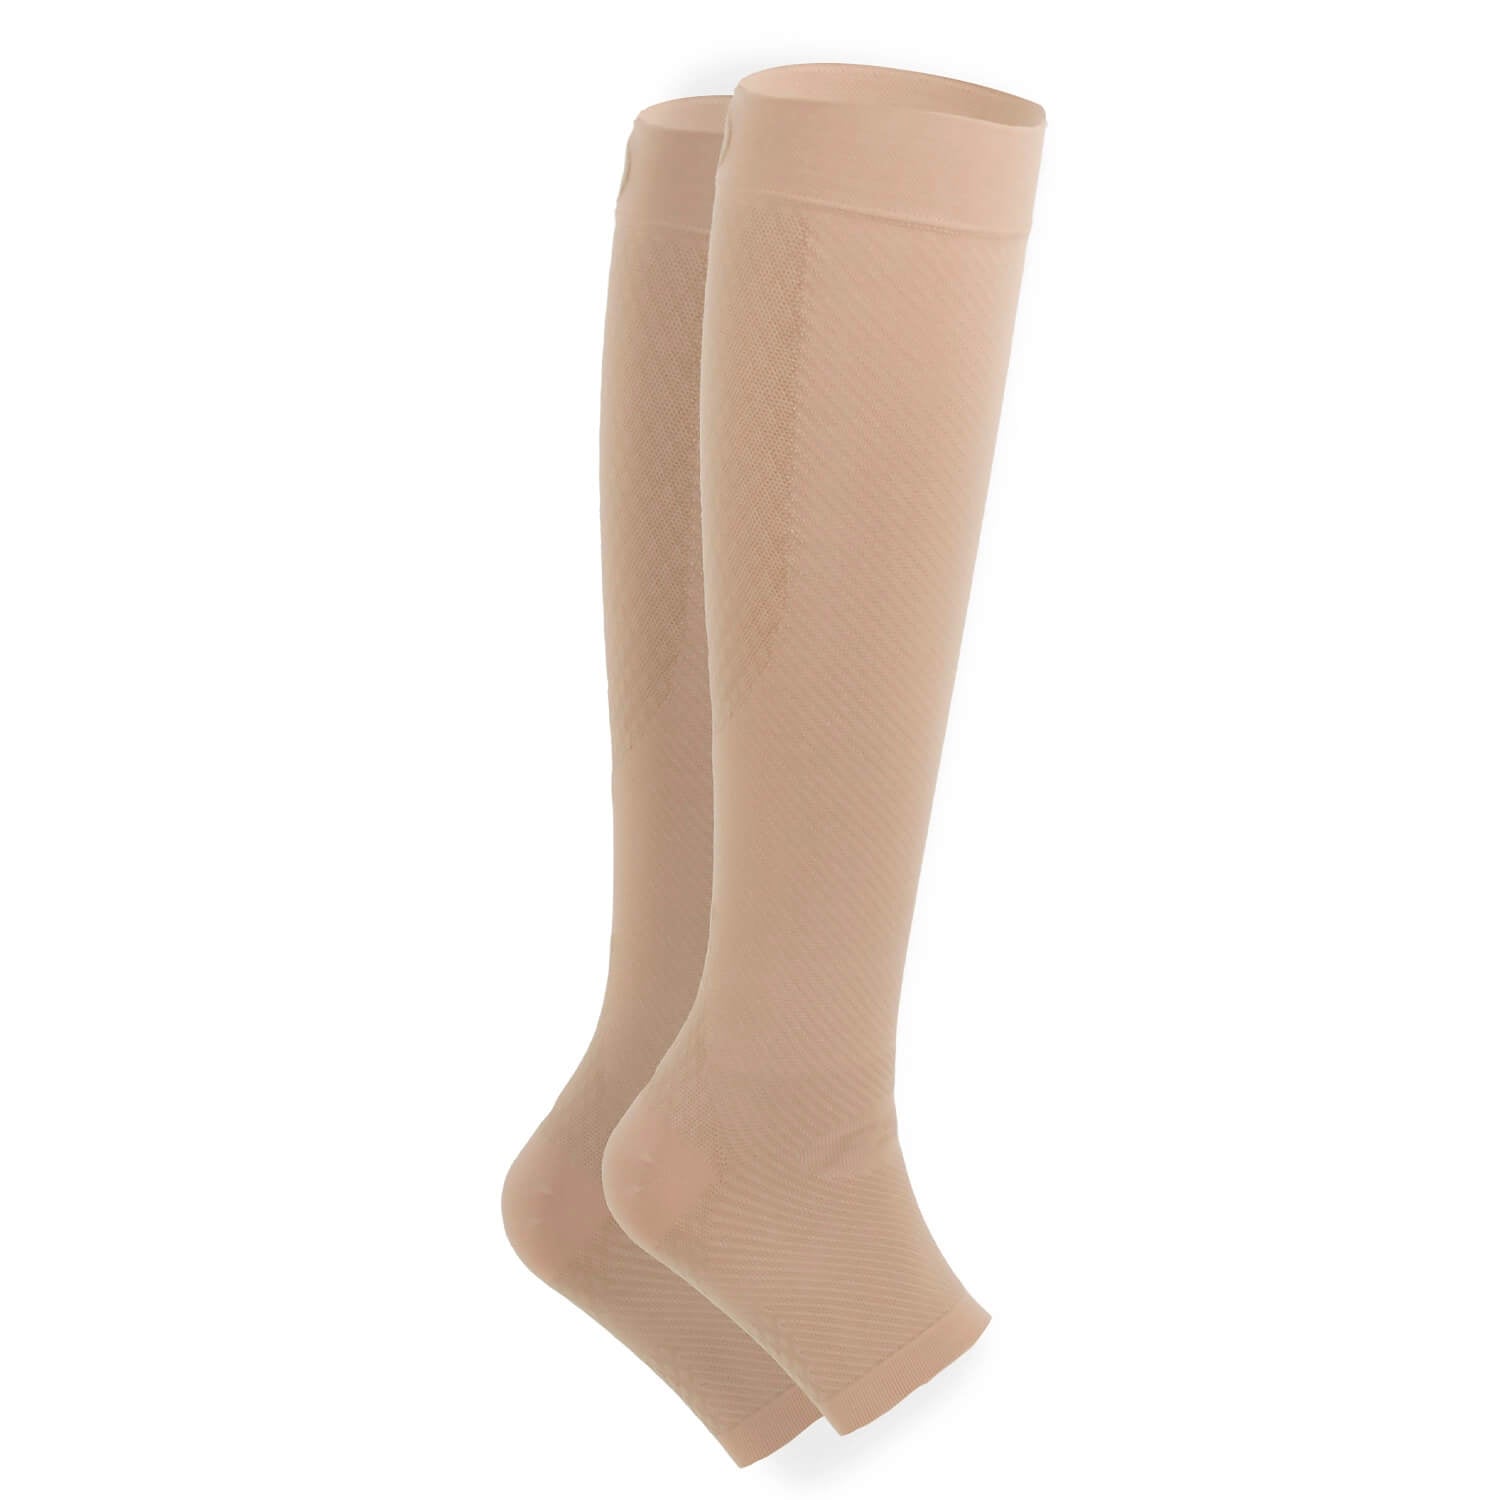 FS6+ Foot &amp; Calf Compression Sleeves - Soft Supports for Foot &amp; Leg Pain, Swelling &amp; Fatigue Relief